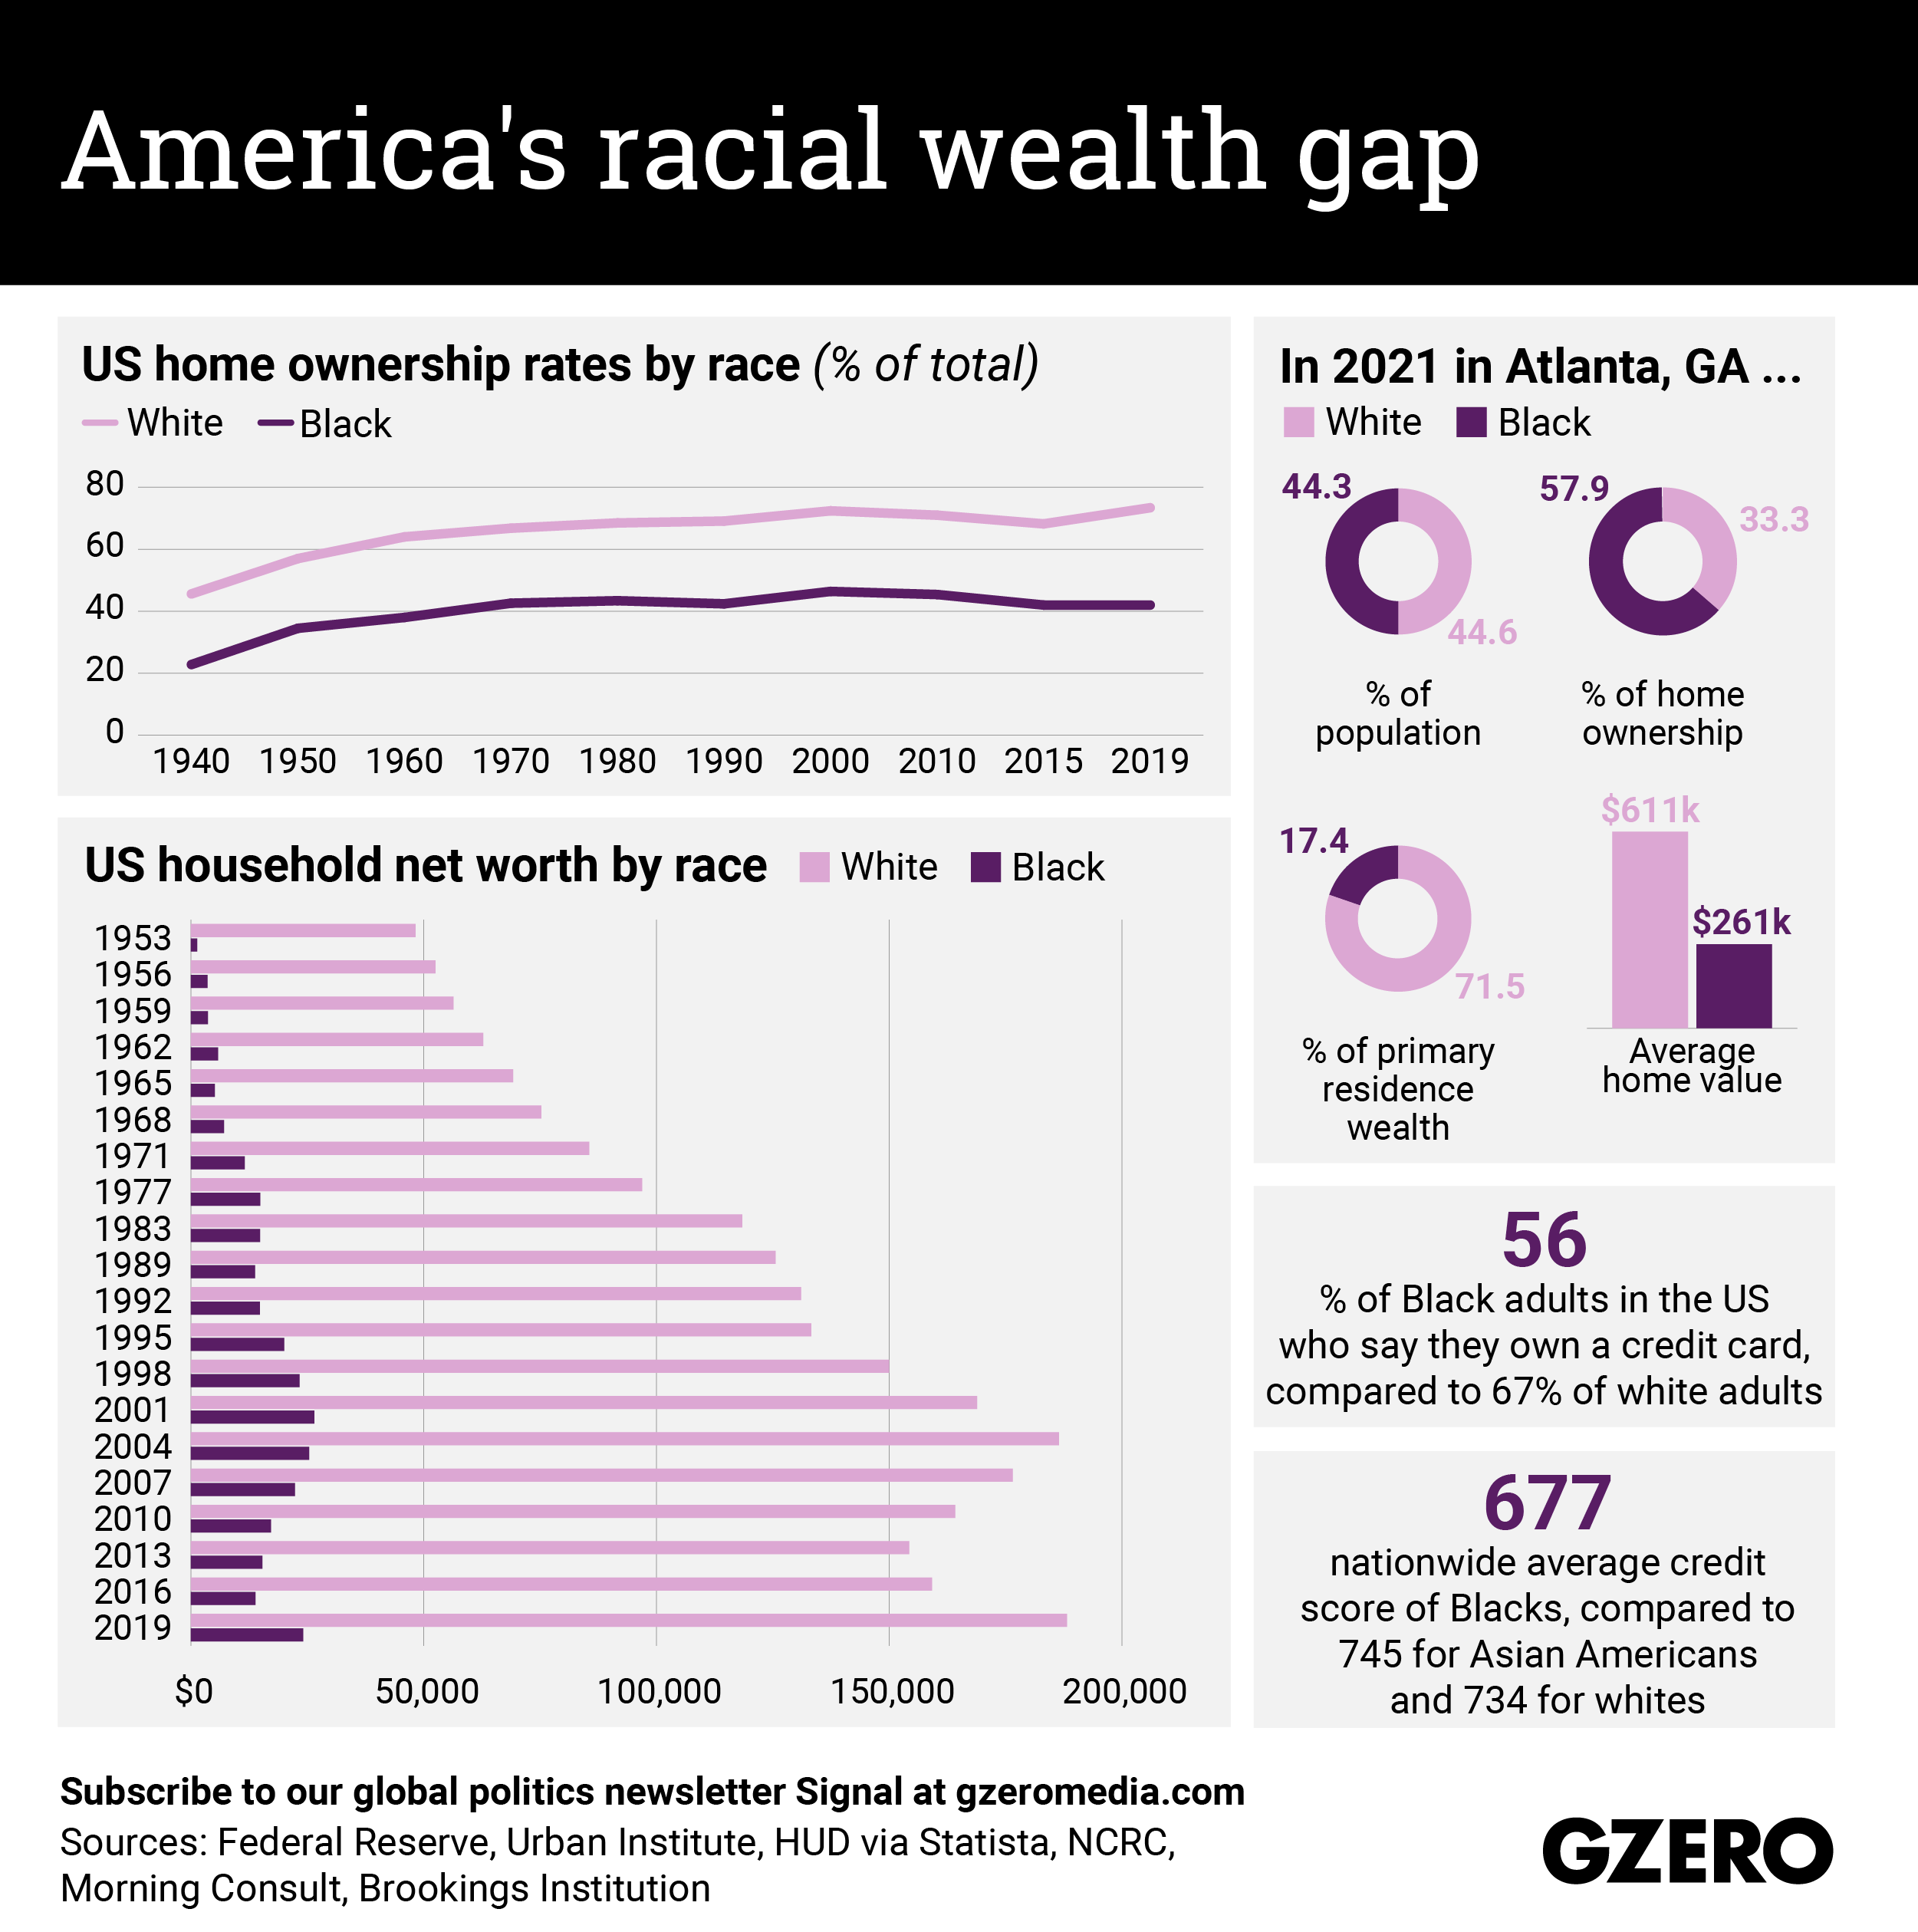 The Graphic Truth: America's racial wealth gap